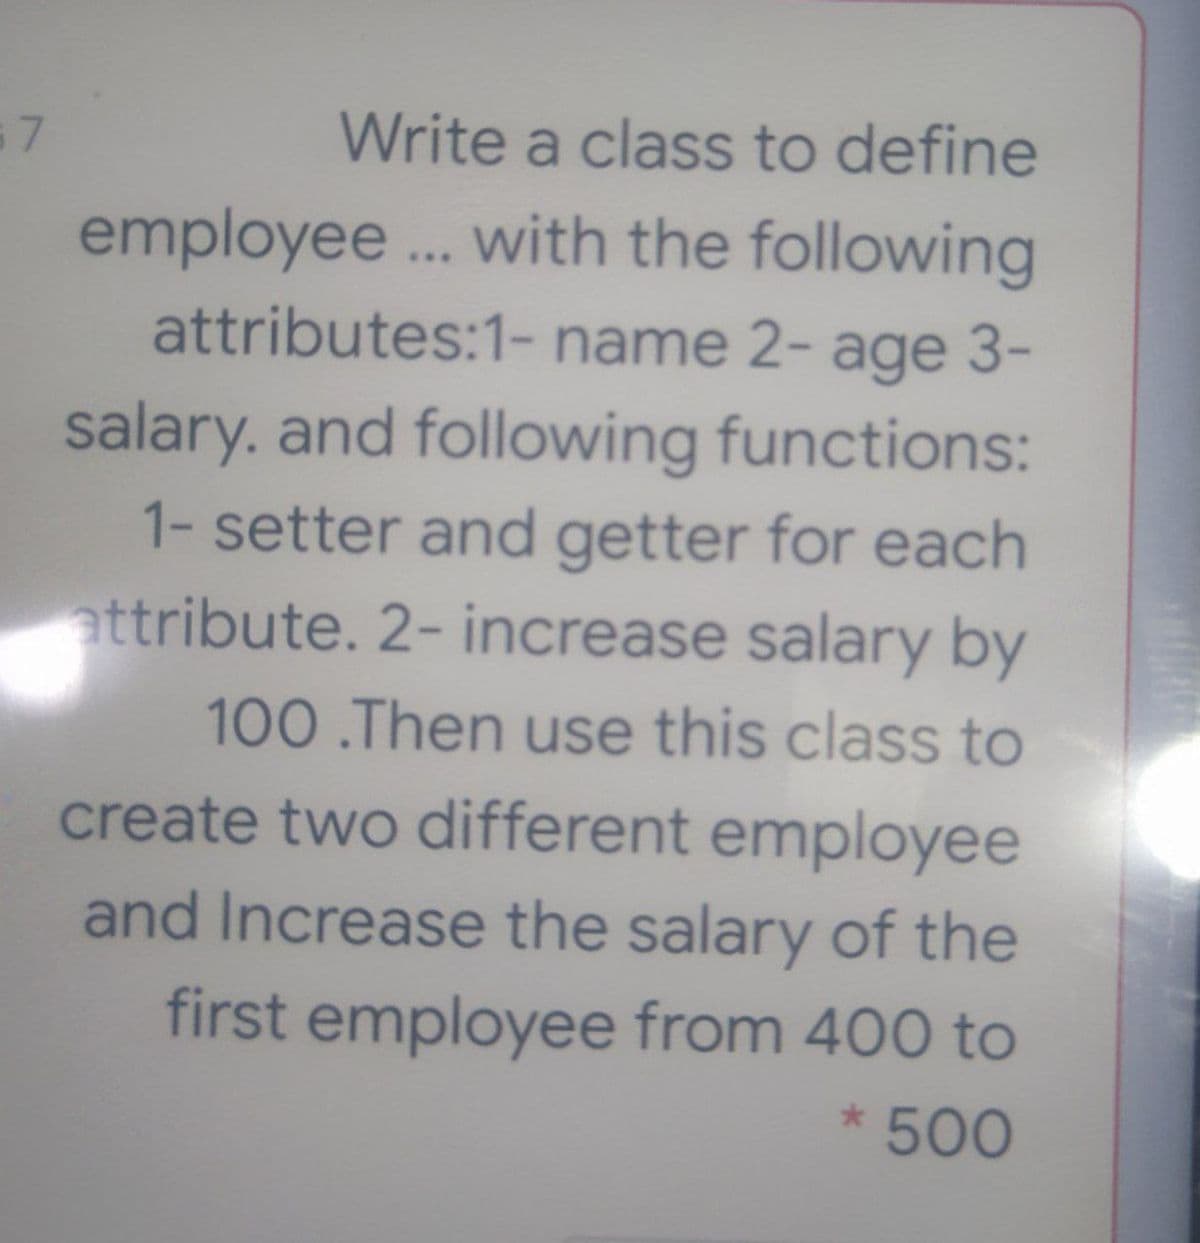 Write a class to define
employee... with the following
attributes:1- name 2- age 3-
salary. and following functions:
1- setter and getter for each
attribute. 2- increase salary by
100 .Then use this class to
create two different employee
and Increase the salary of the
first employee from 400 to
* 500
